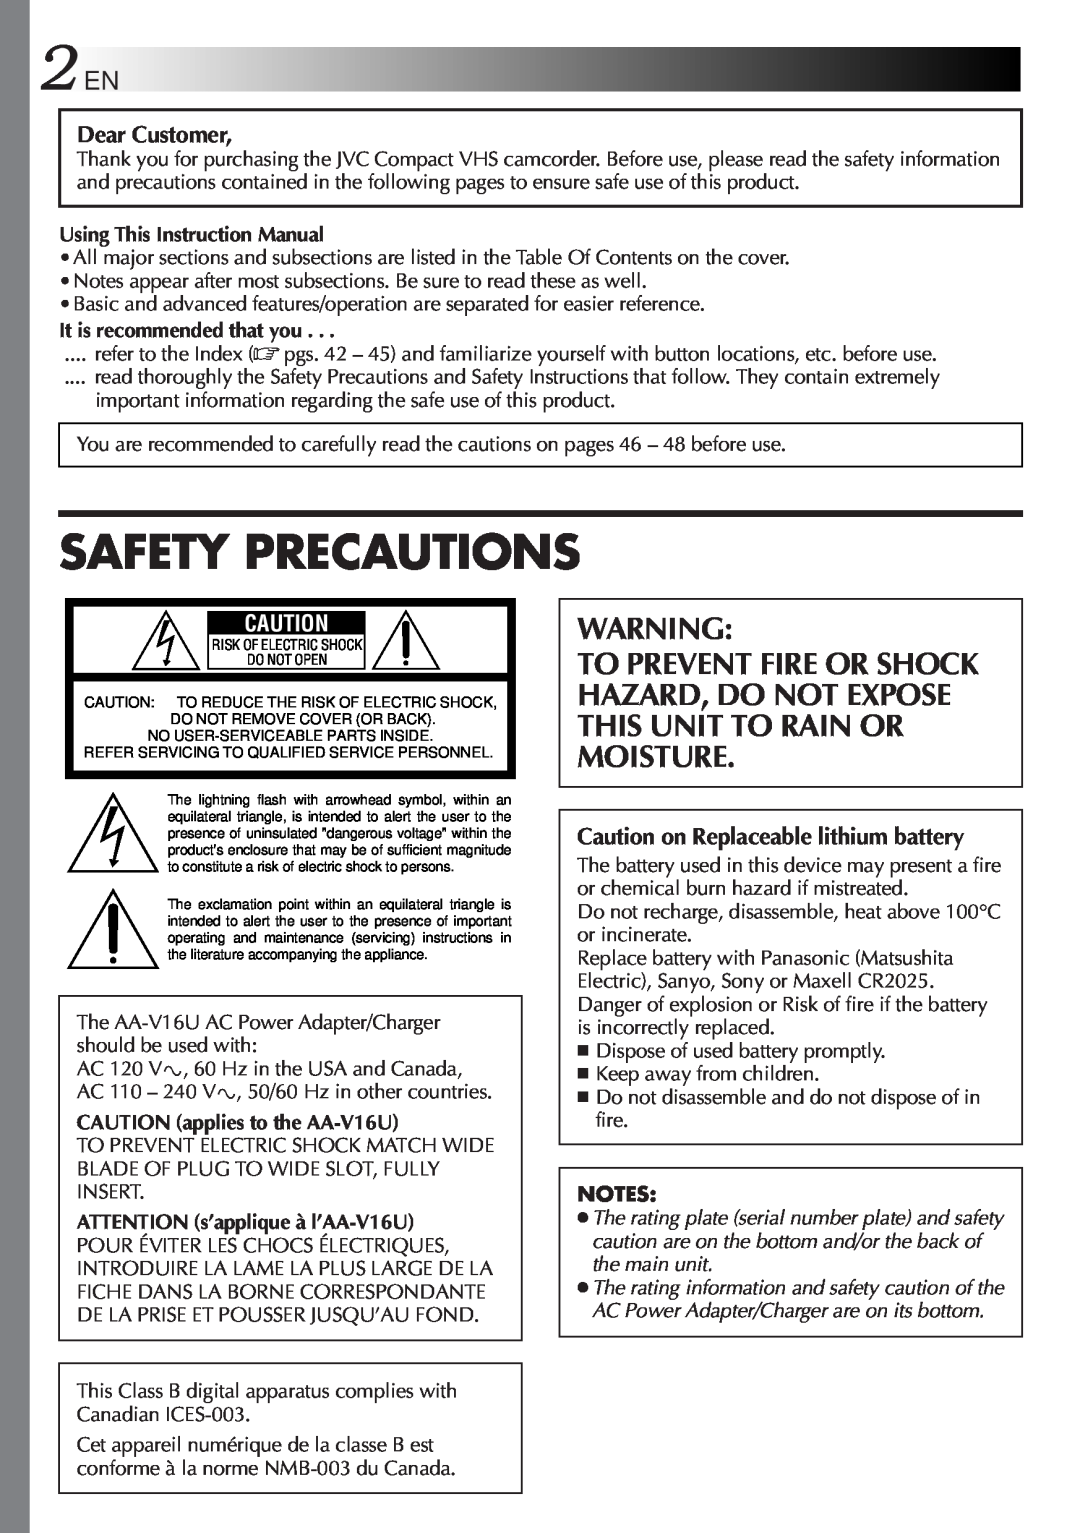 JVC GR-SXM321 specifications Safety Precautions, Dear Customer, Caution on Replaceable lithium battery 